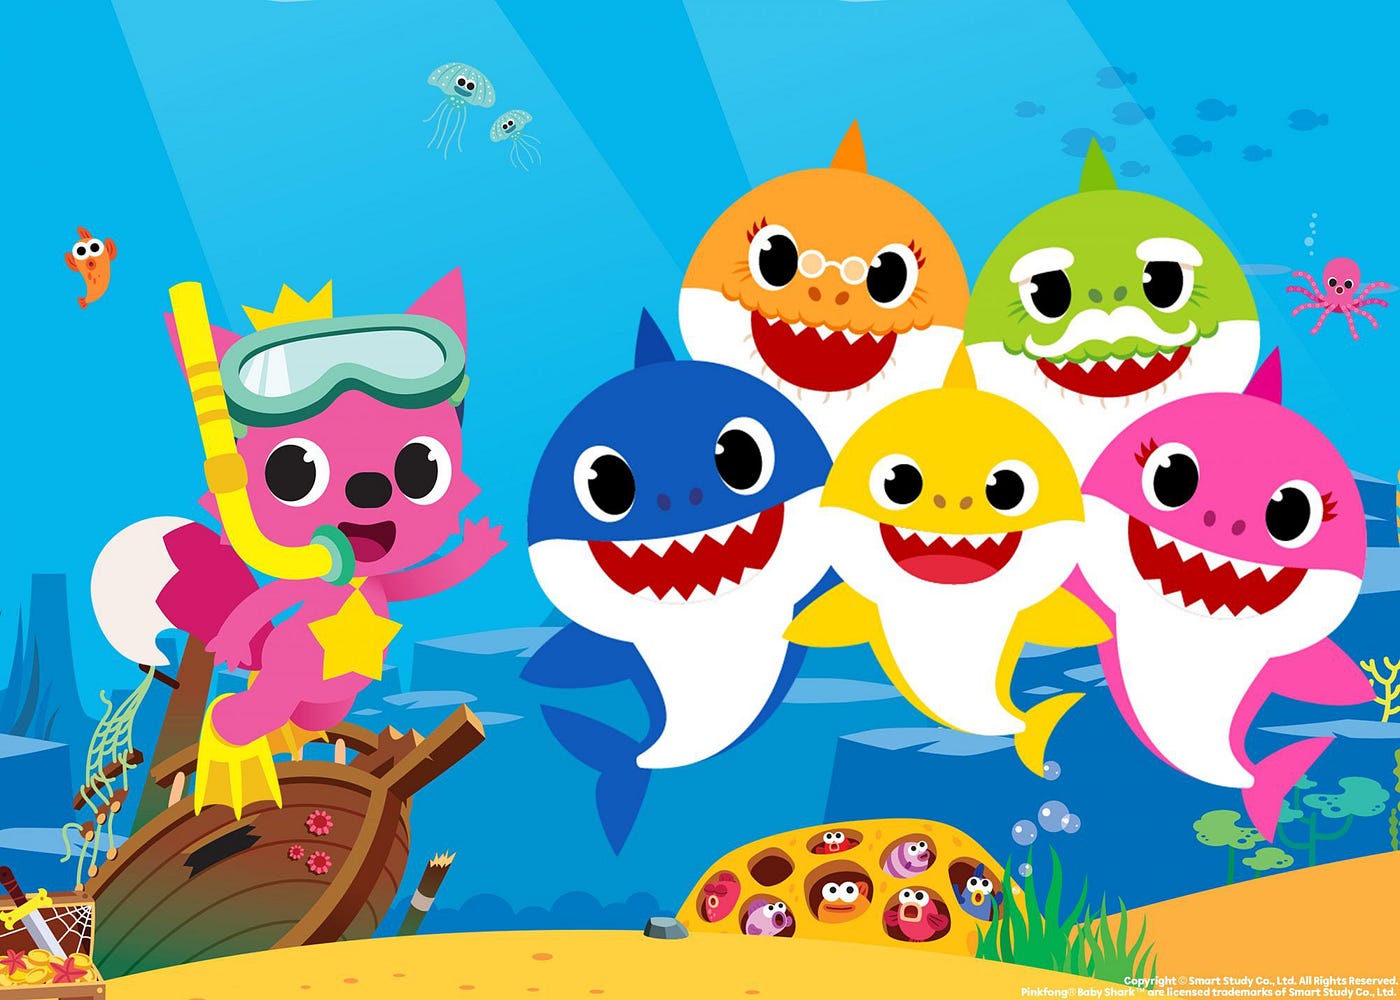 The story behind the success that is “Baby Shark.”